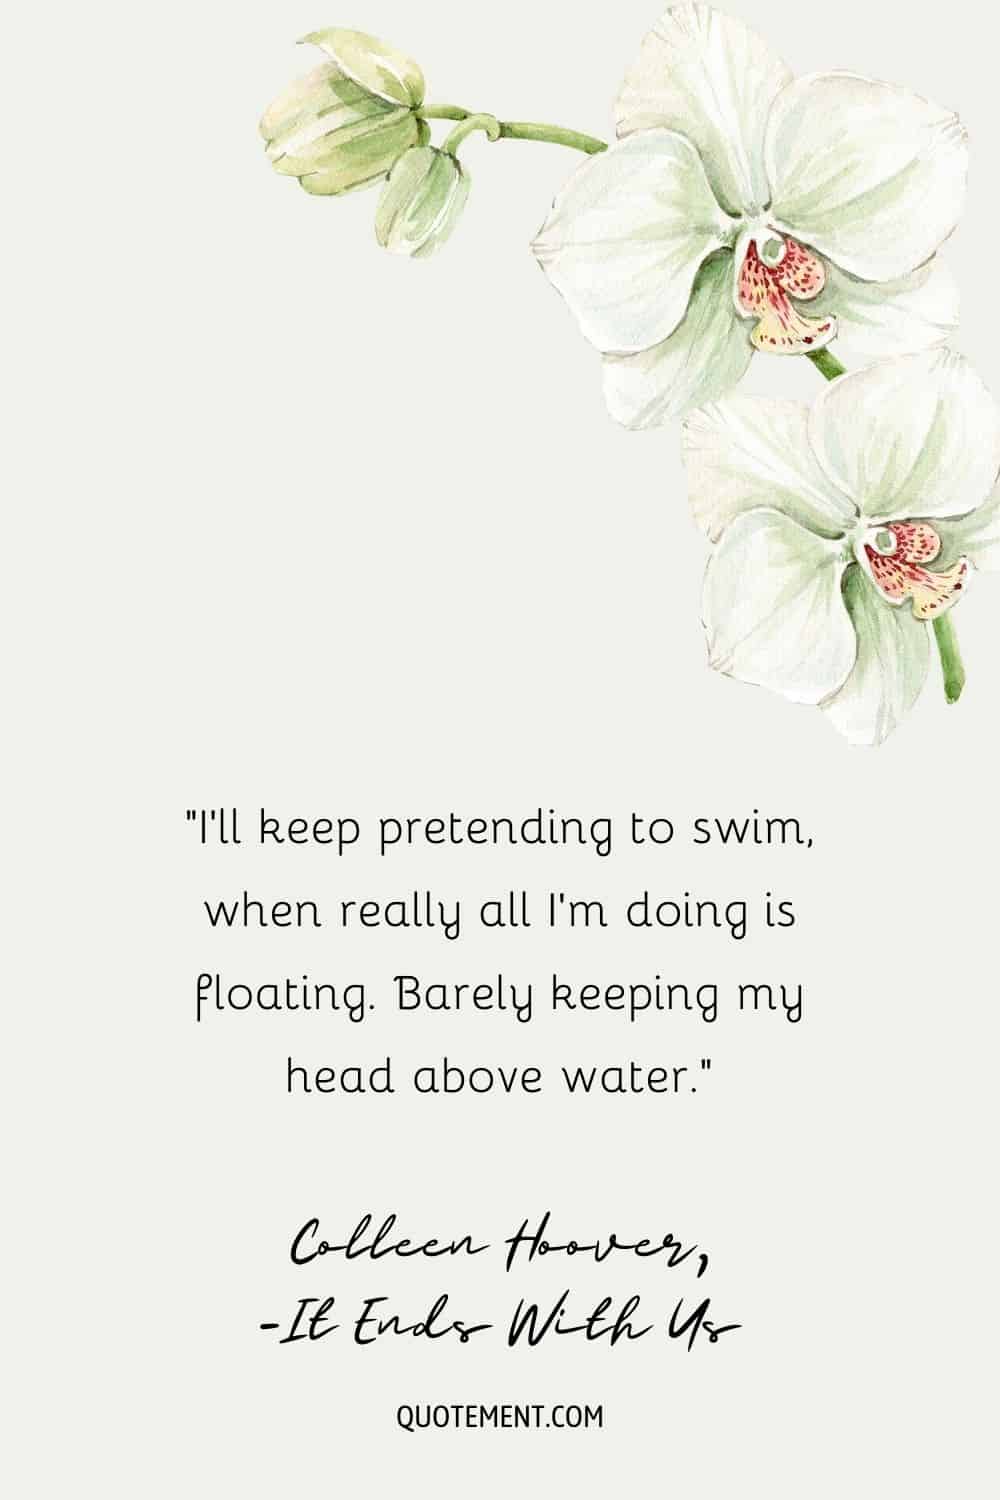 Head above water quote from It ends with us on a floral background.
